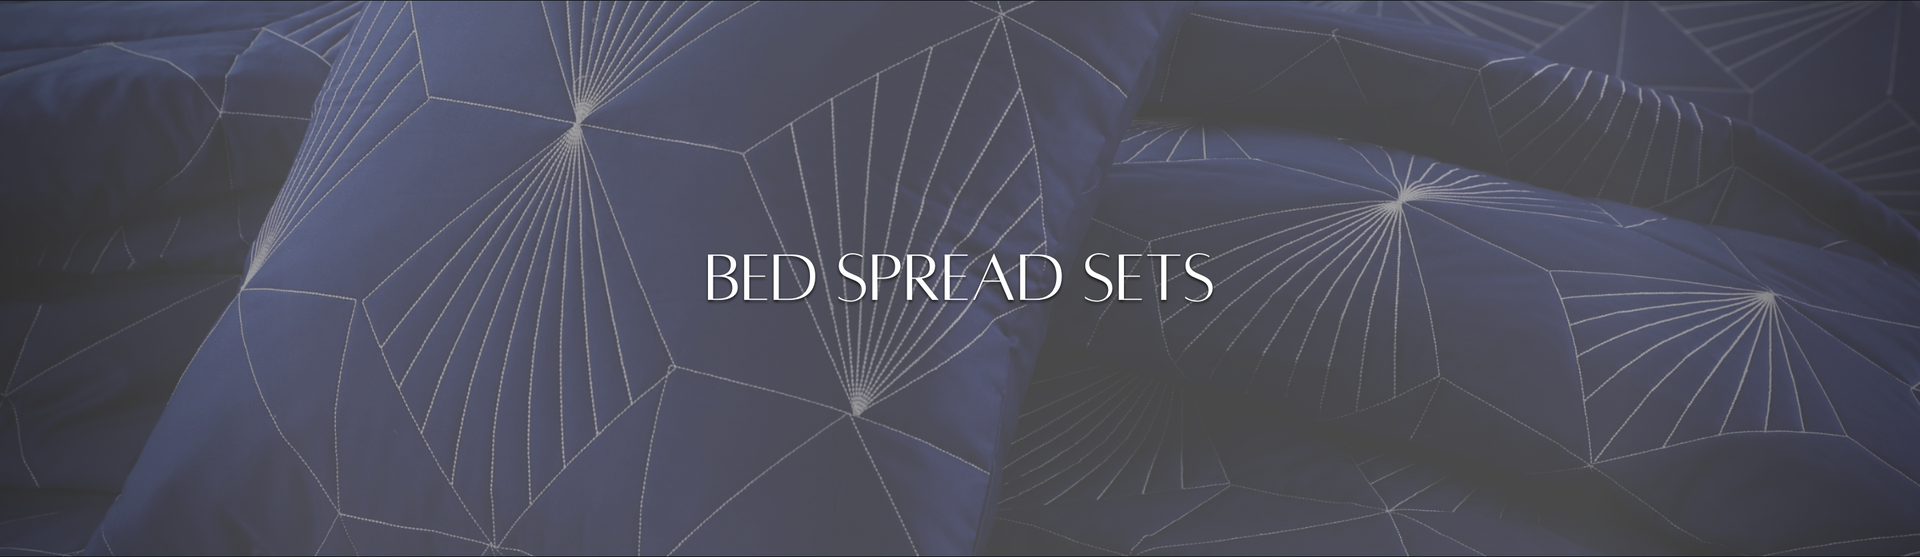 Bedding - Bedding Accessories - Bed Spread Sets